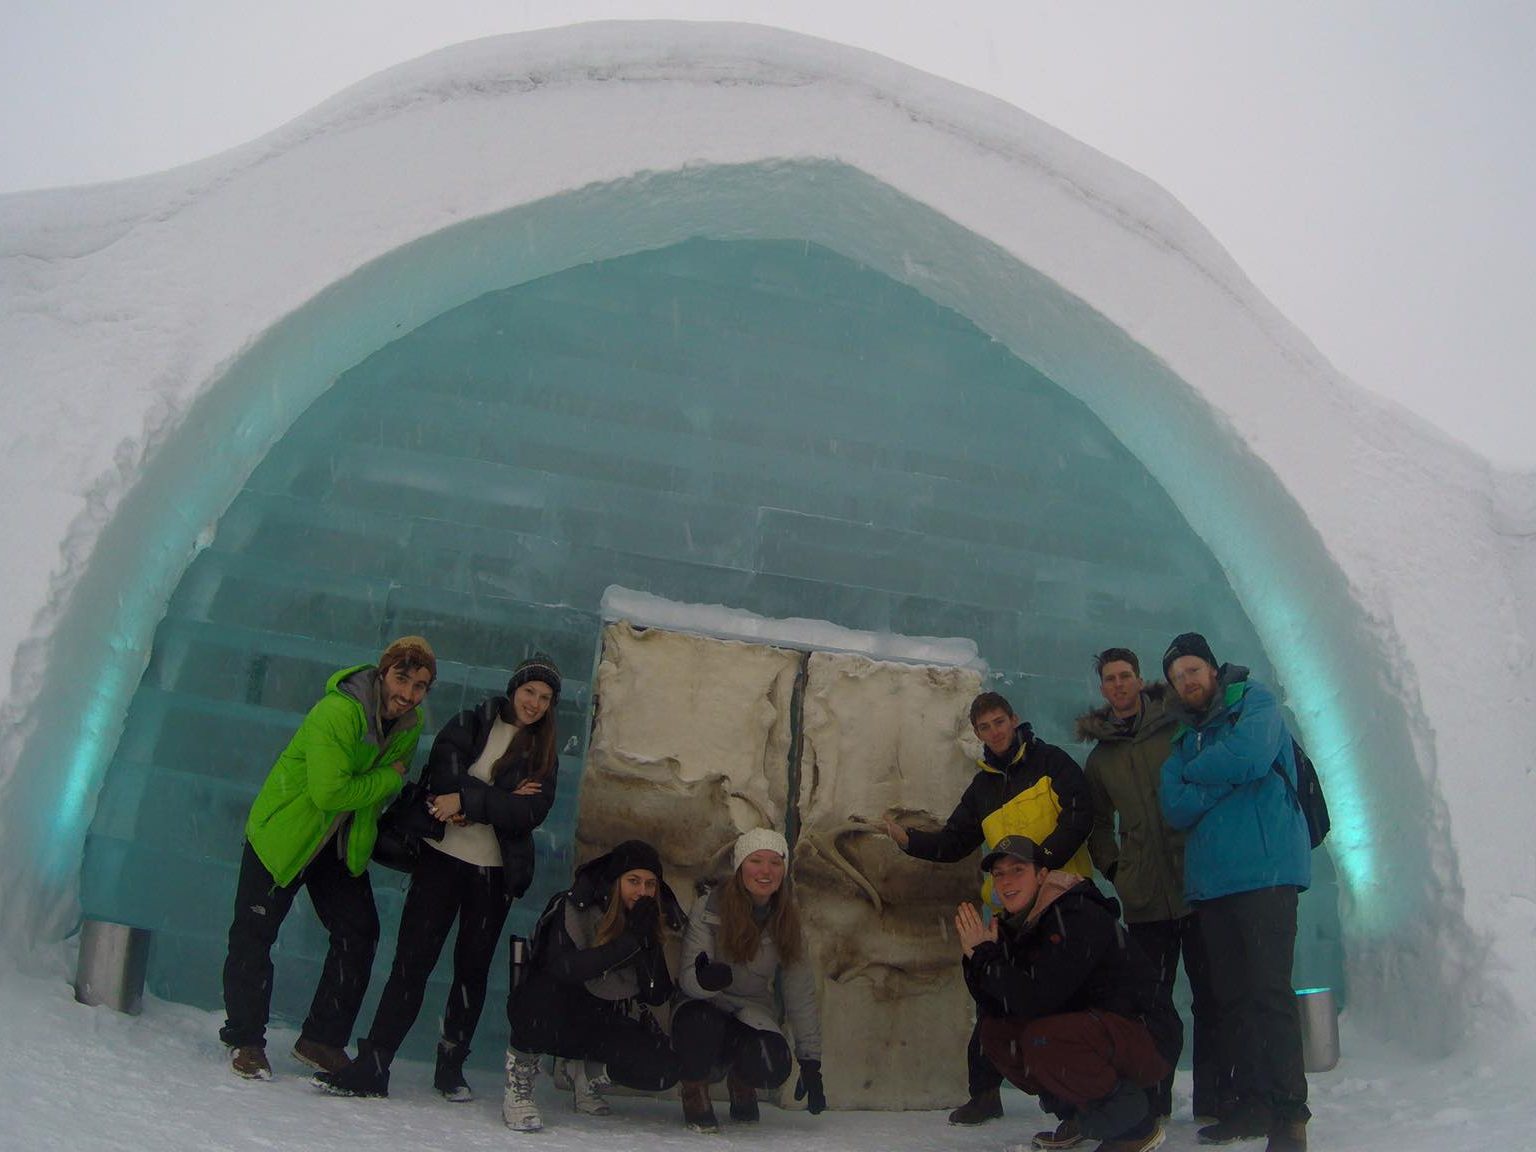 Connor Genther and friends at the Icehotel, Jukkasjärvi